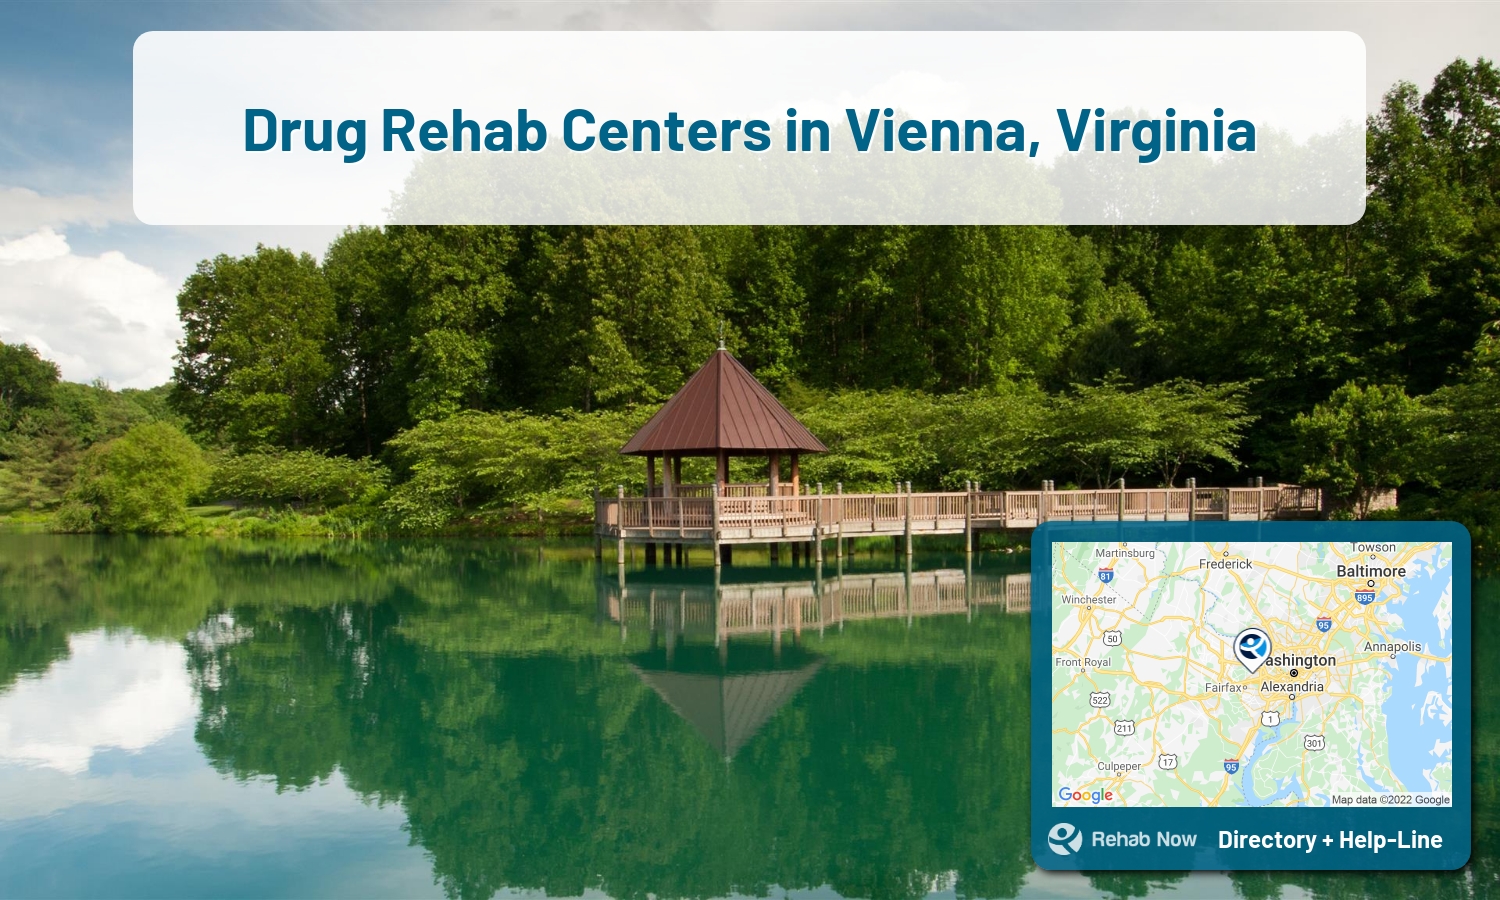 Let our expert counselors help find the best addiction treatment in Vienna, Virginia for you or a loved one now with a free call to our hotline.